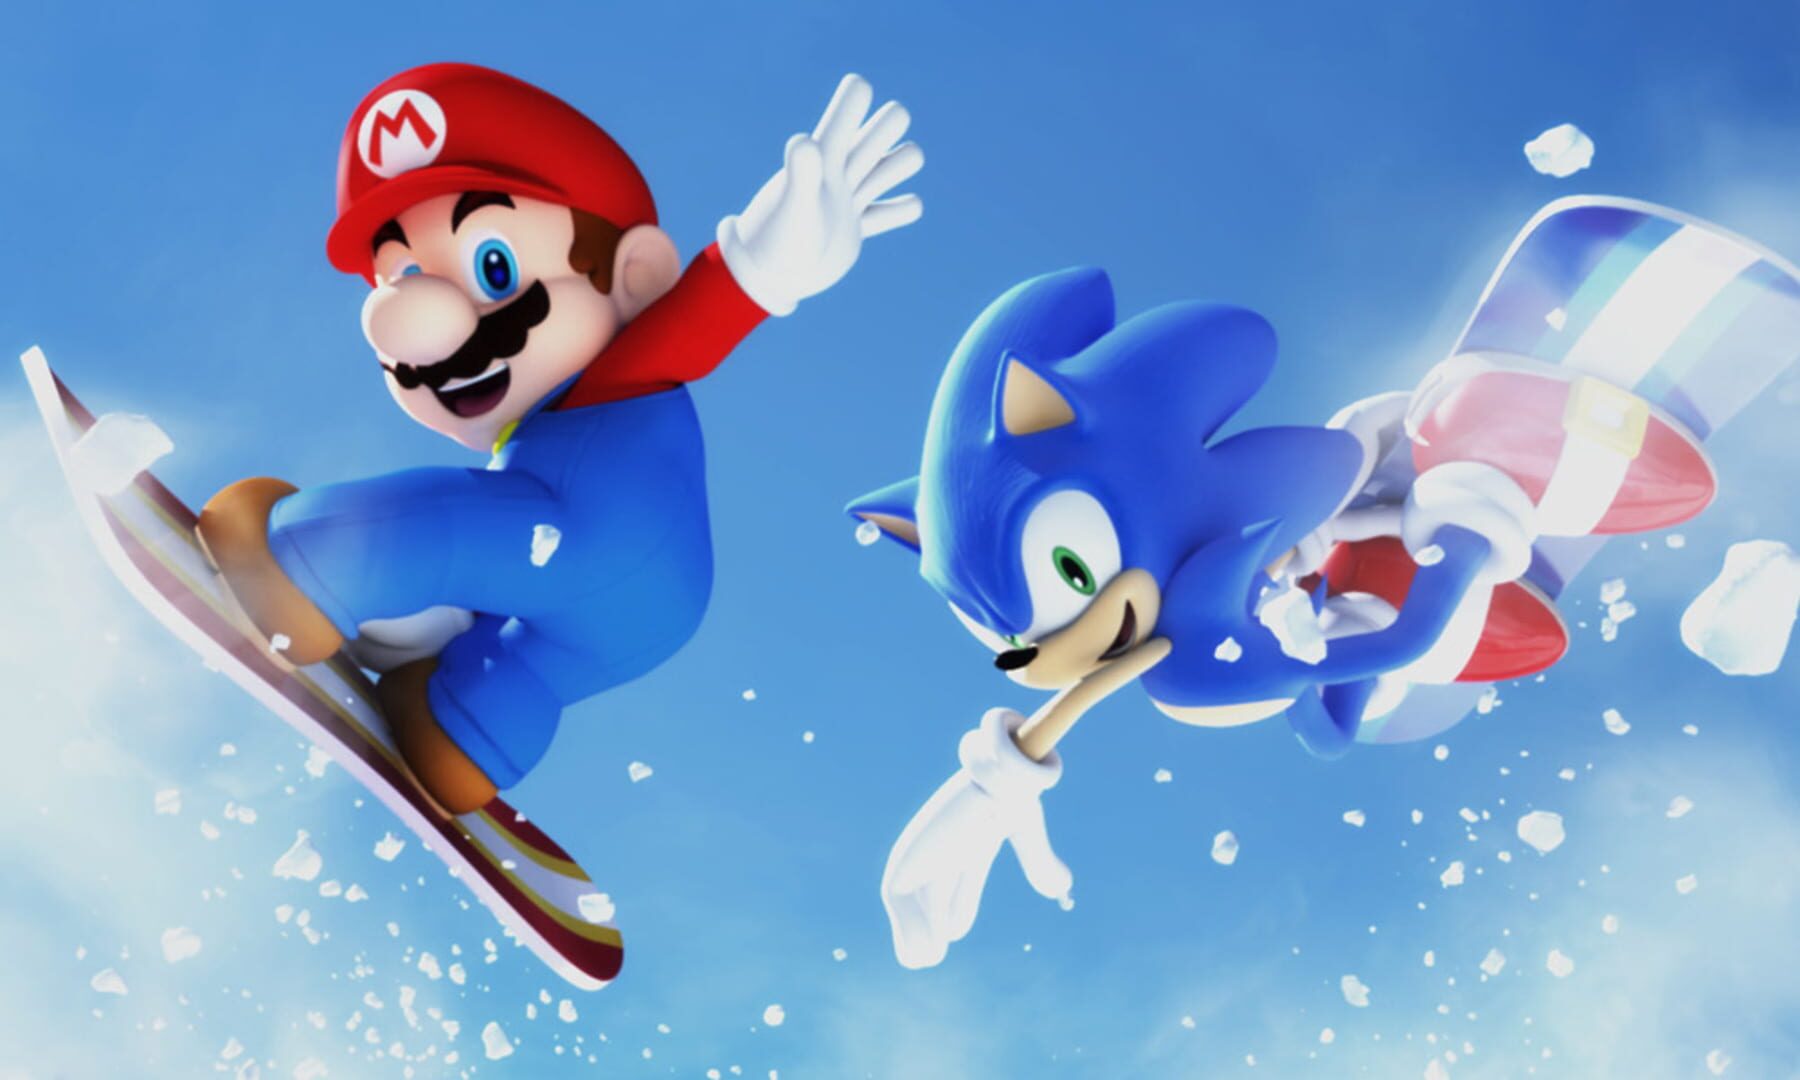 Arte - Mario & Sonic at the Olympic Winter Games